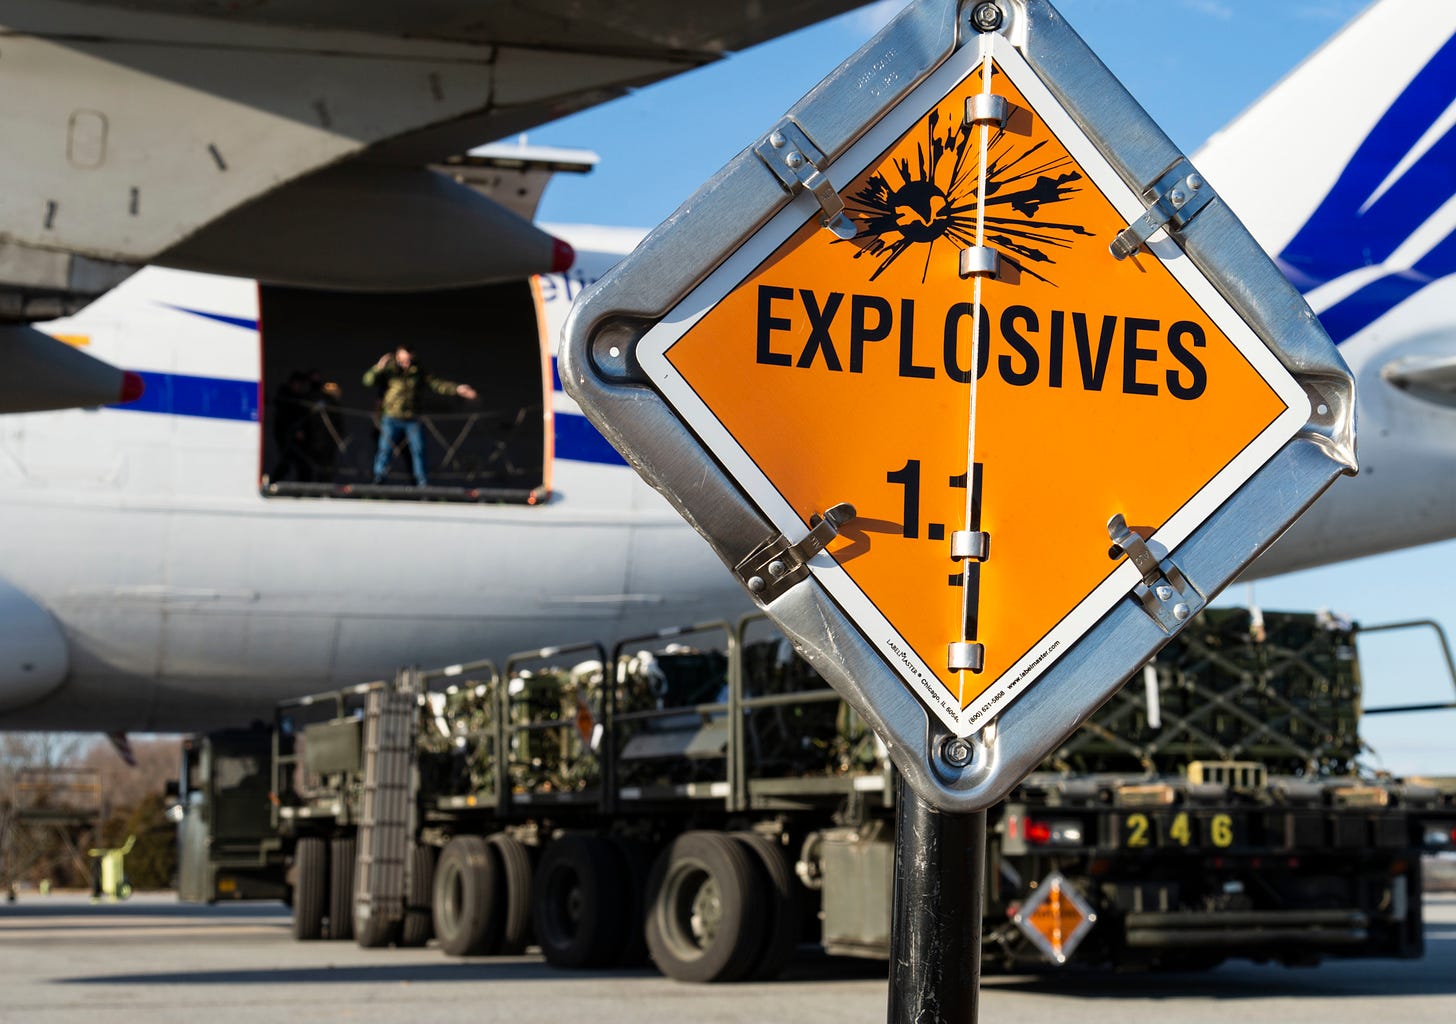 The US Air Force loads military cargo bound for Ukraine onto a plane in Delaware. In front is a sign that reads "explosives".